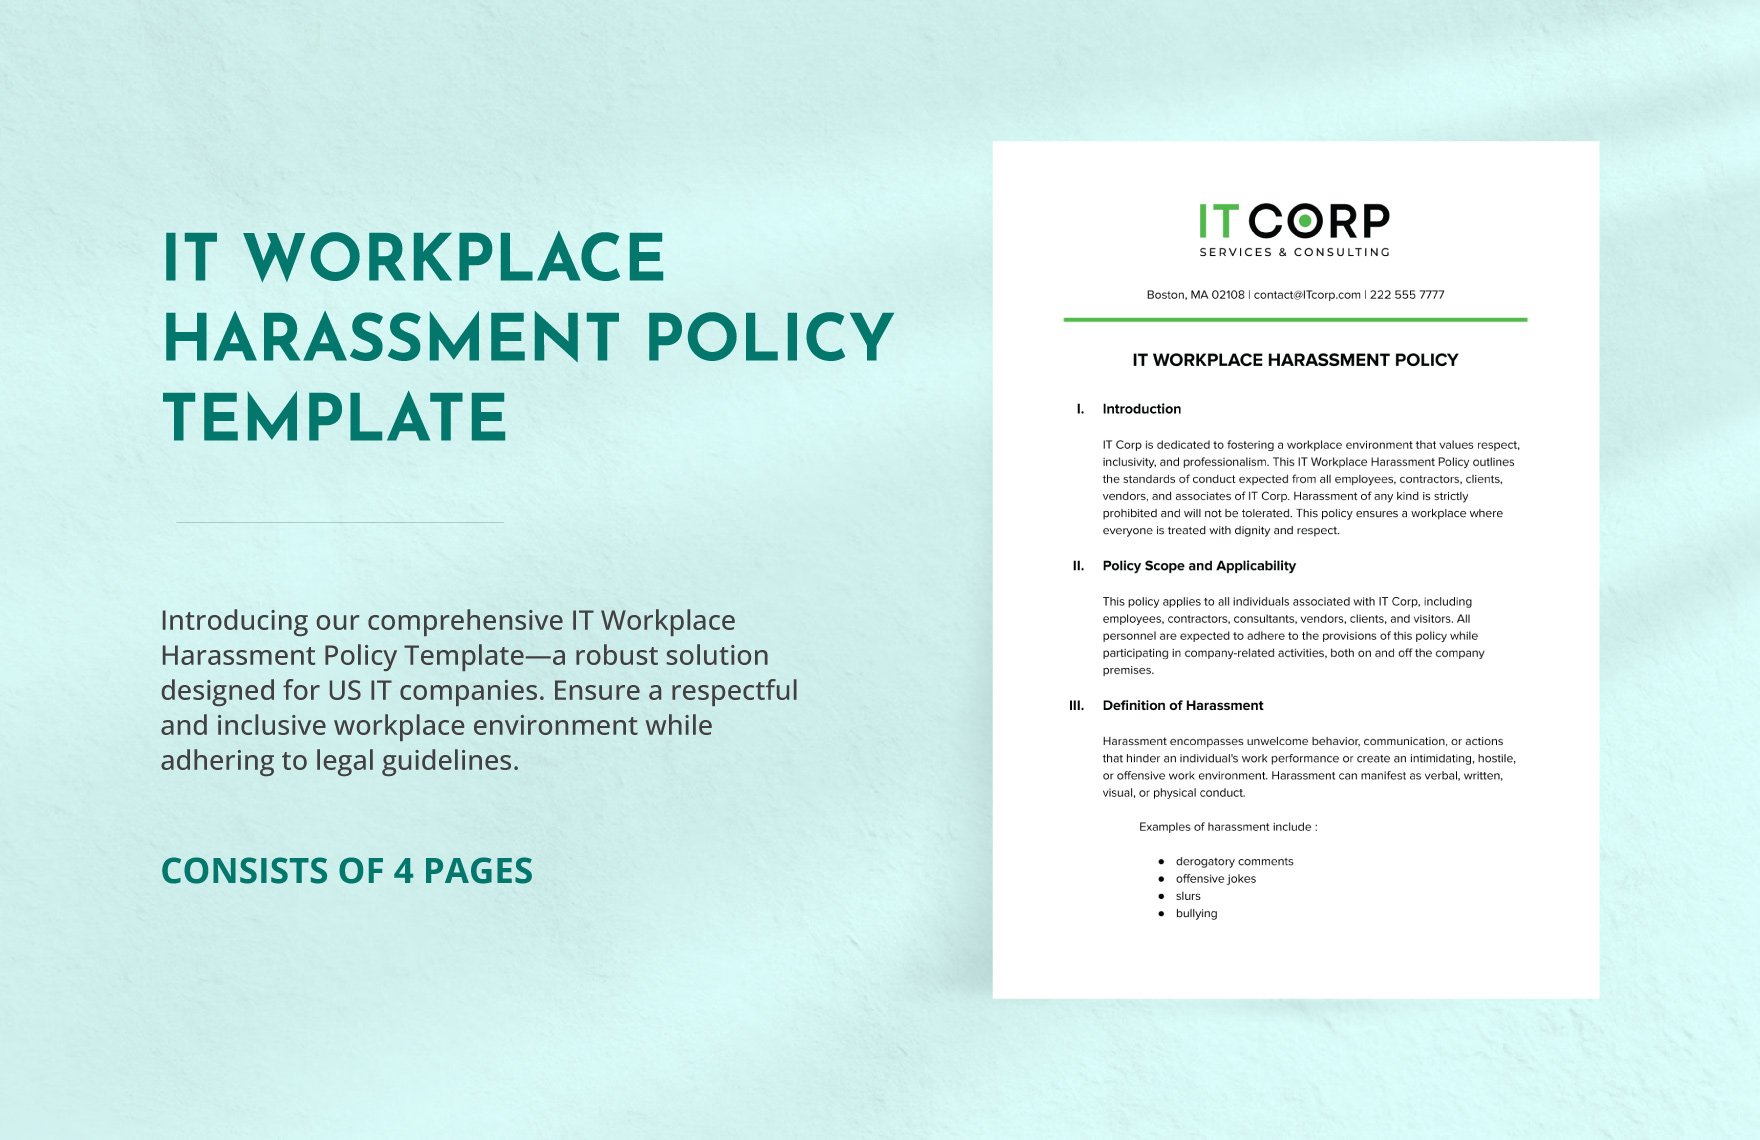 IT Workplace Harassment Policy Template